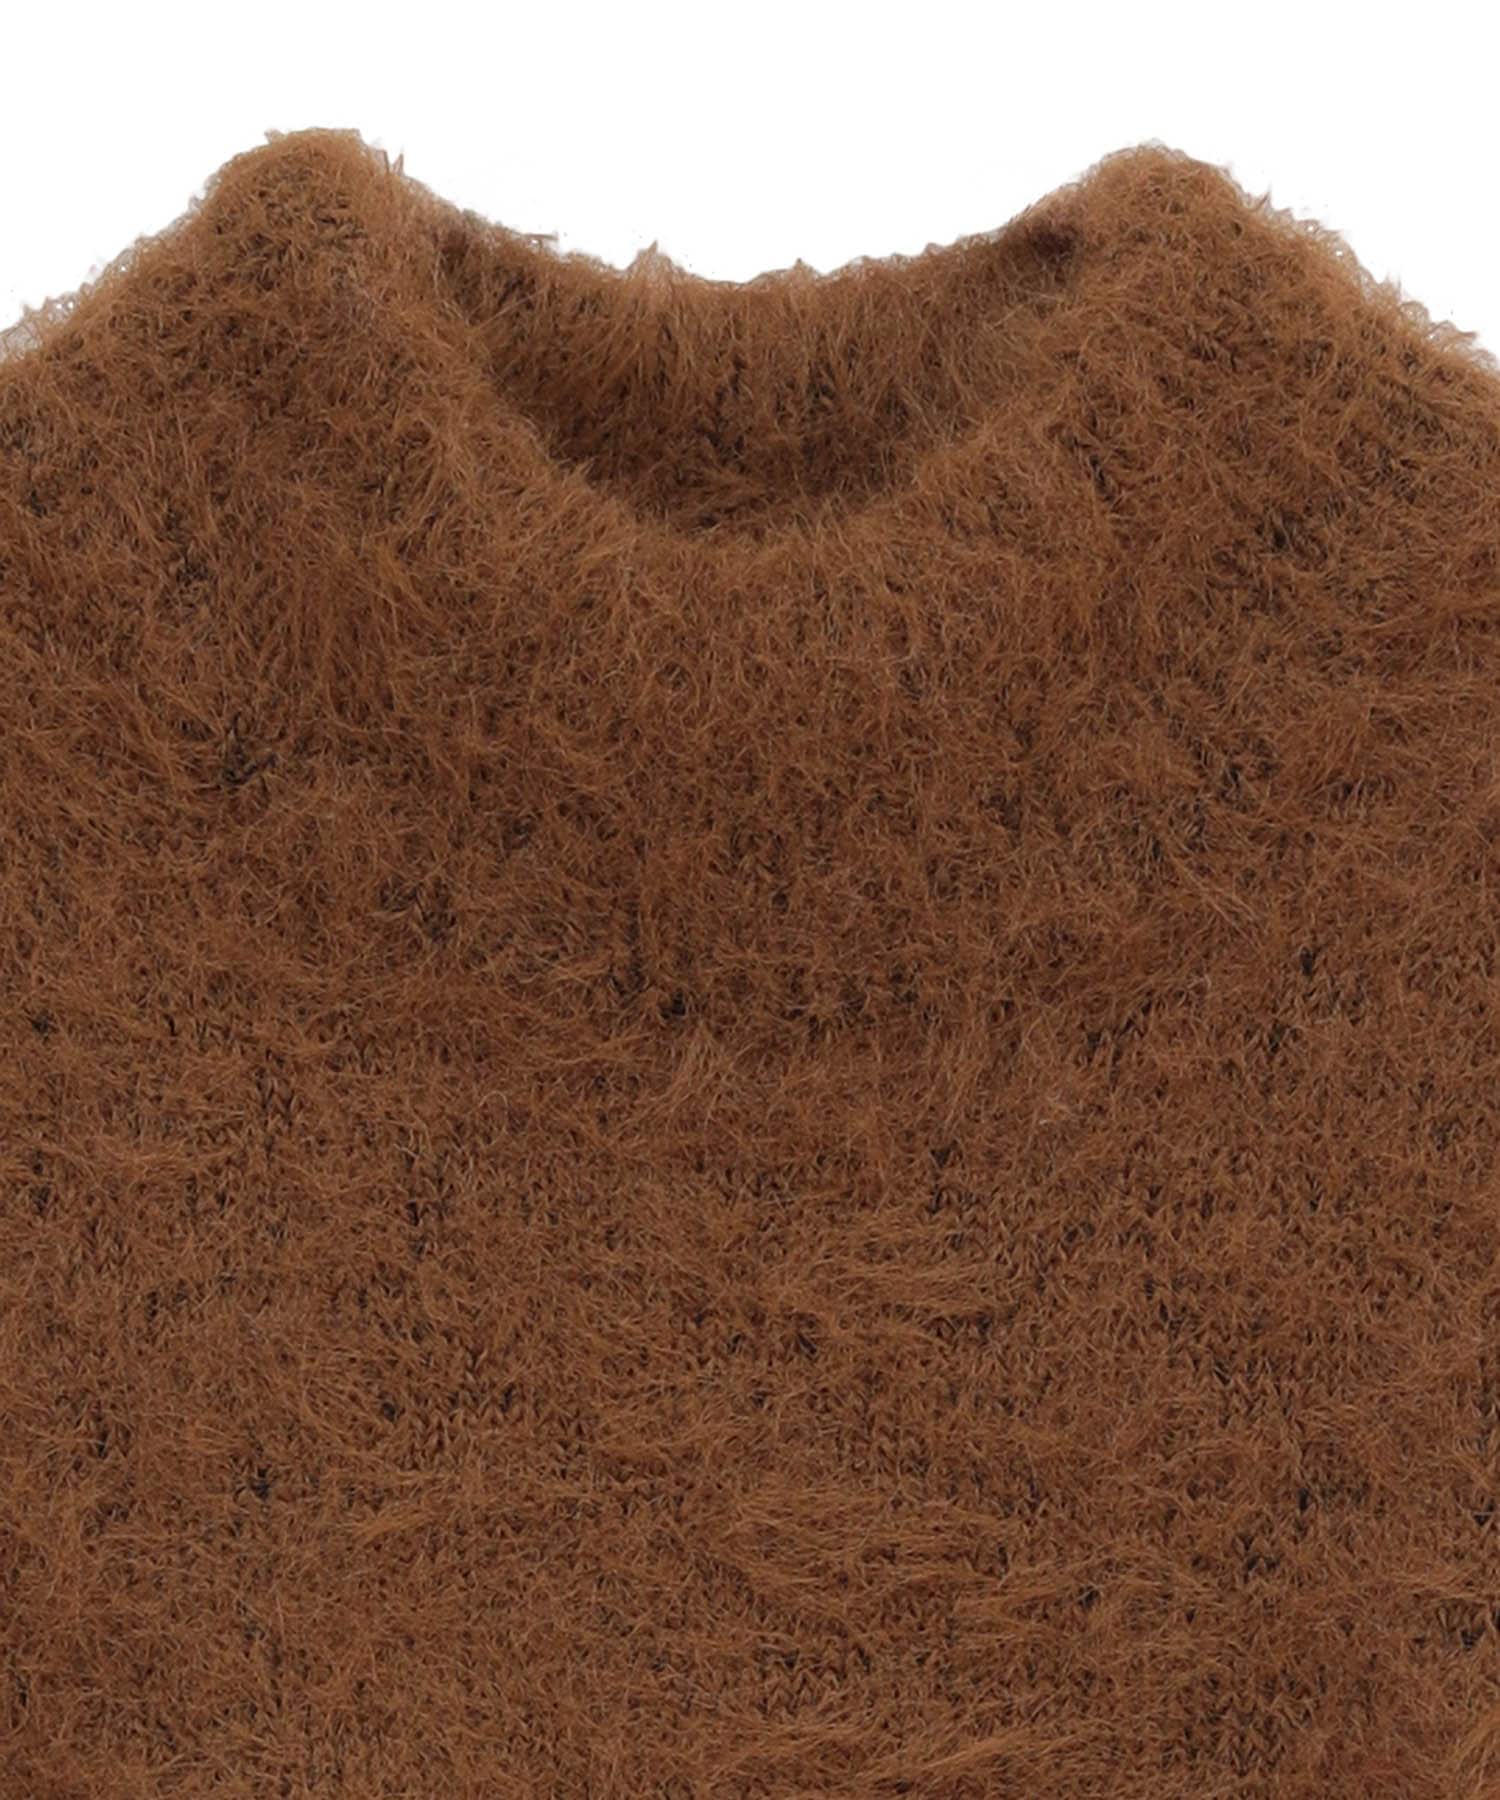 SHAGGY AMERICAN SLEEVE KNIT TOPS(1 BROWN): CLANE: WOMENS ...